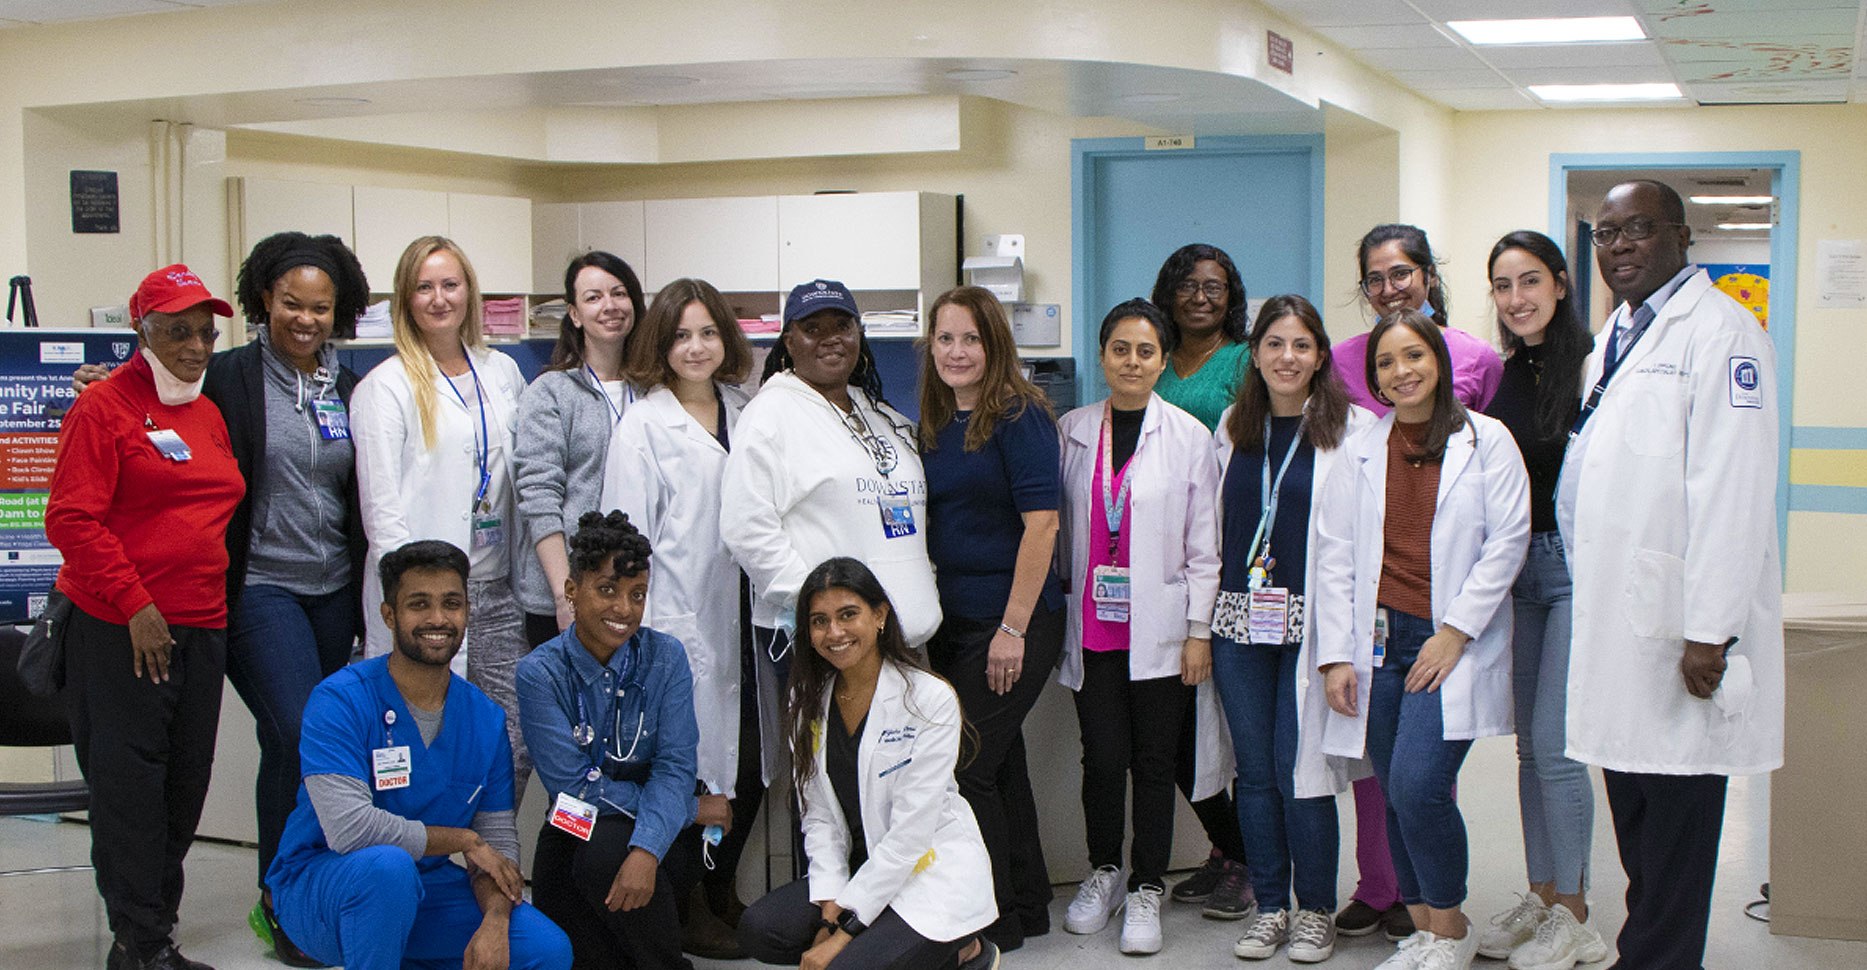 SUNY Downstate Health Sciences doctors and students pose for a picture in a hospital hallway after a health fair finished.